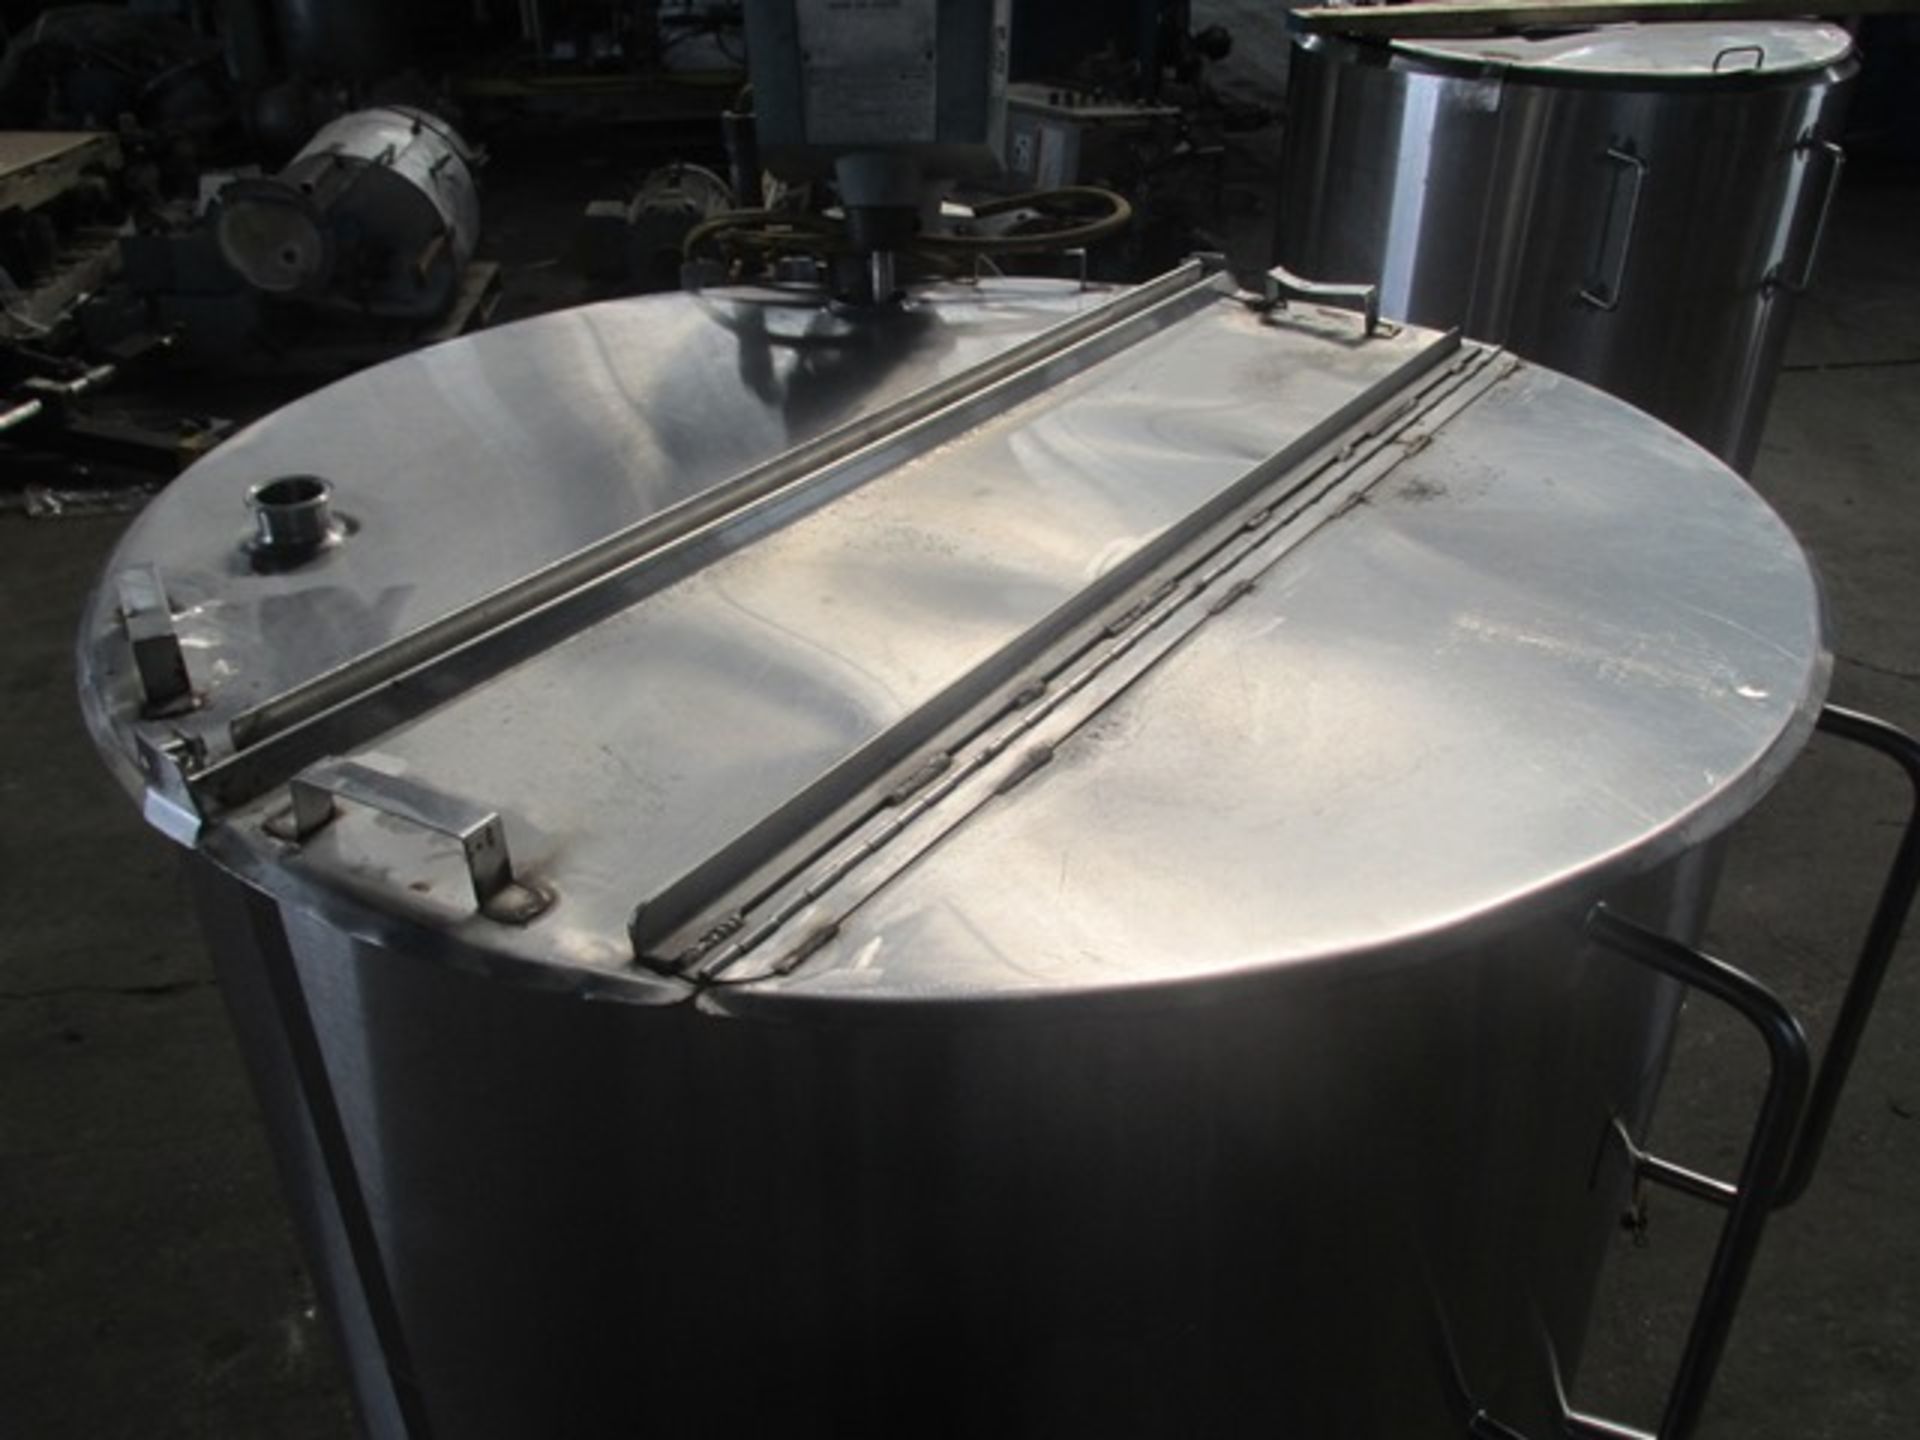 250 gallon CherryBurrell mix tank, stainless steel construction, 48" diameter x 36" straight sides - Image 3 of 9